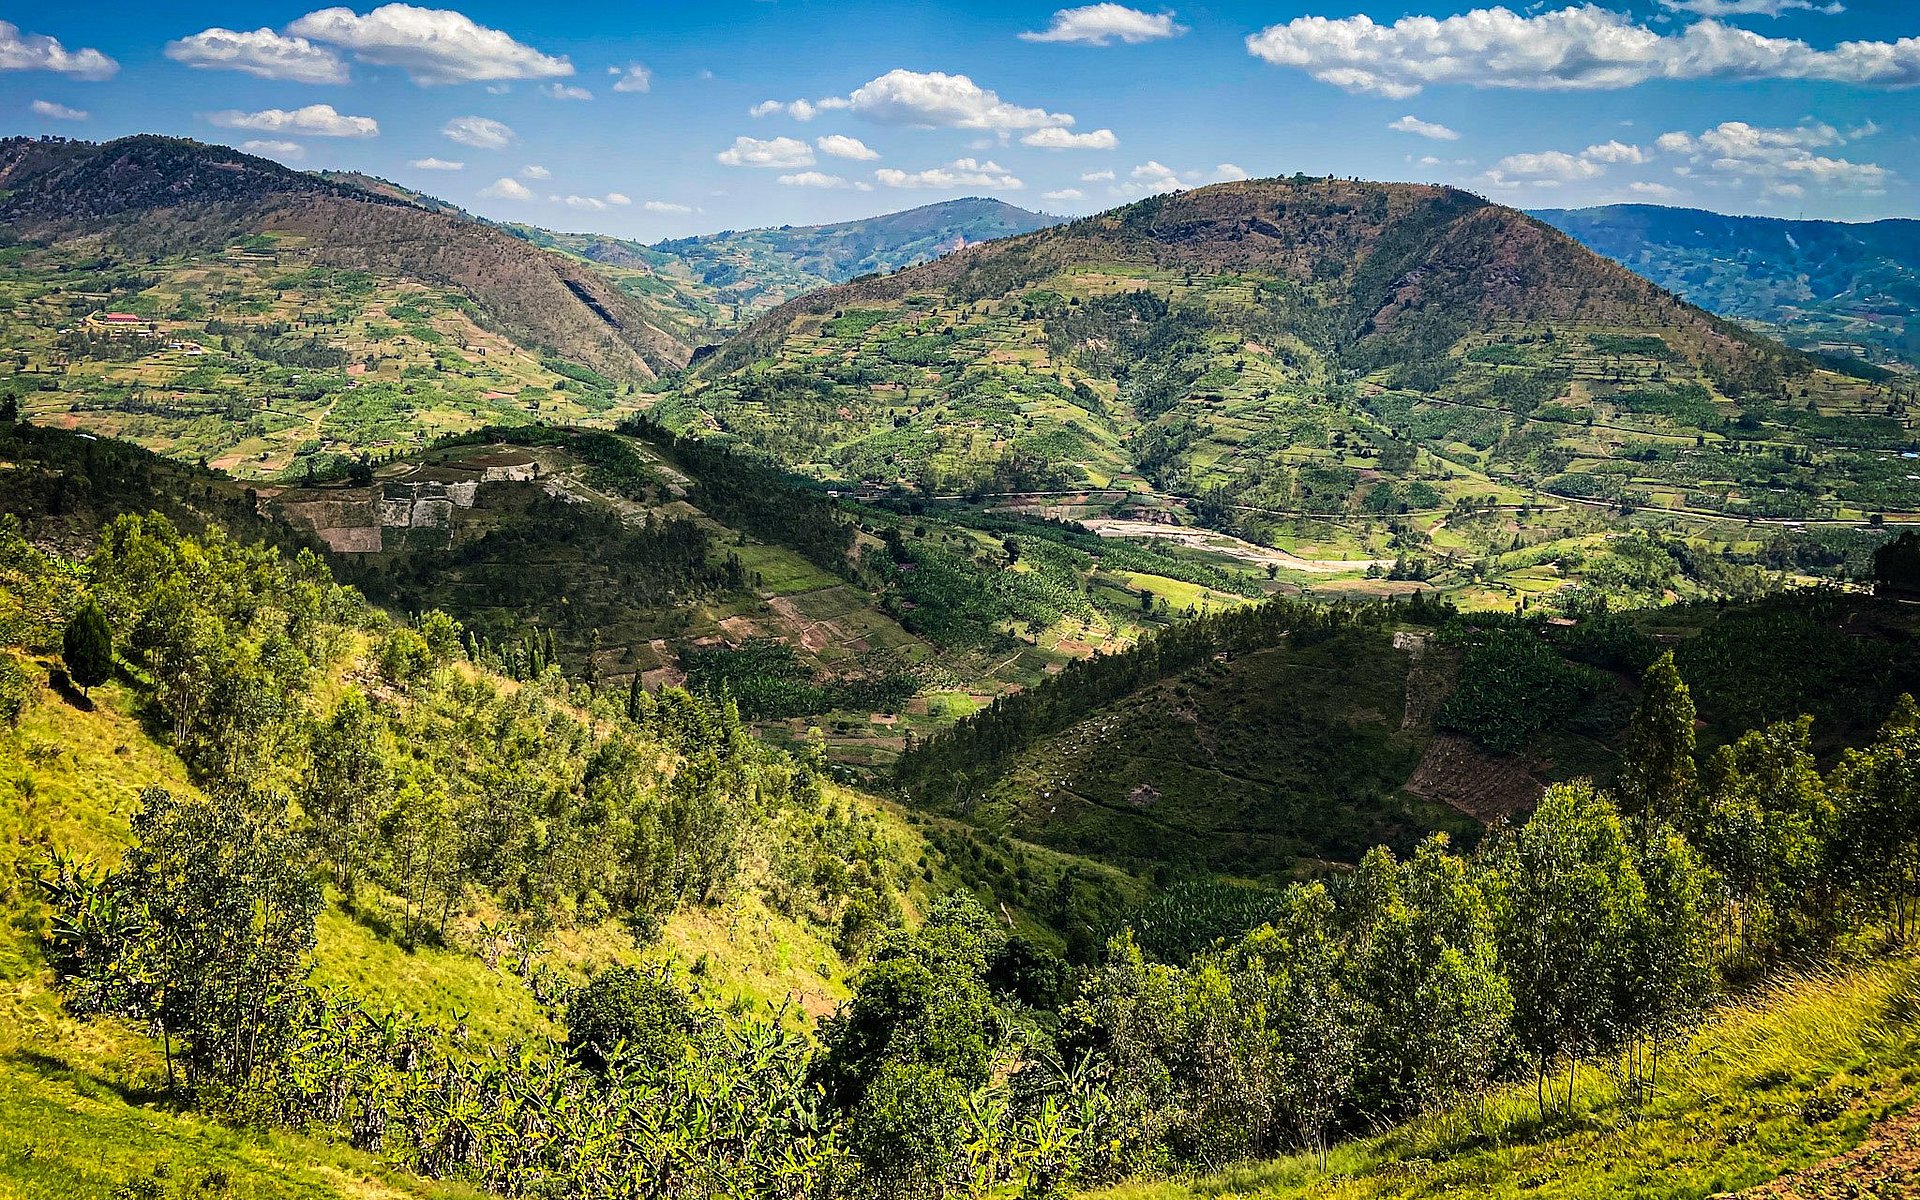 [Translate to English:] Rwanda is called the "land of a thousand hills" because of its topography.